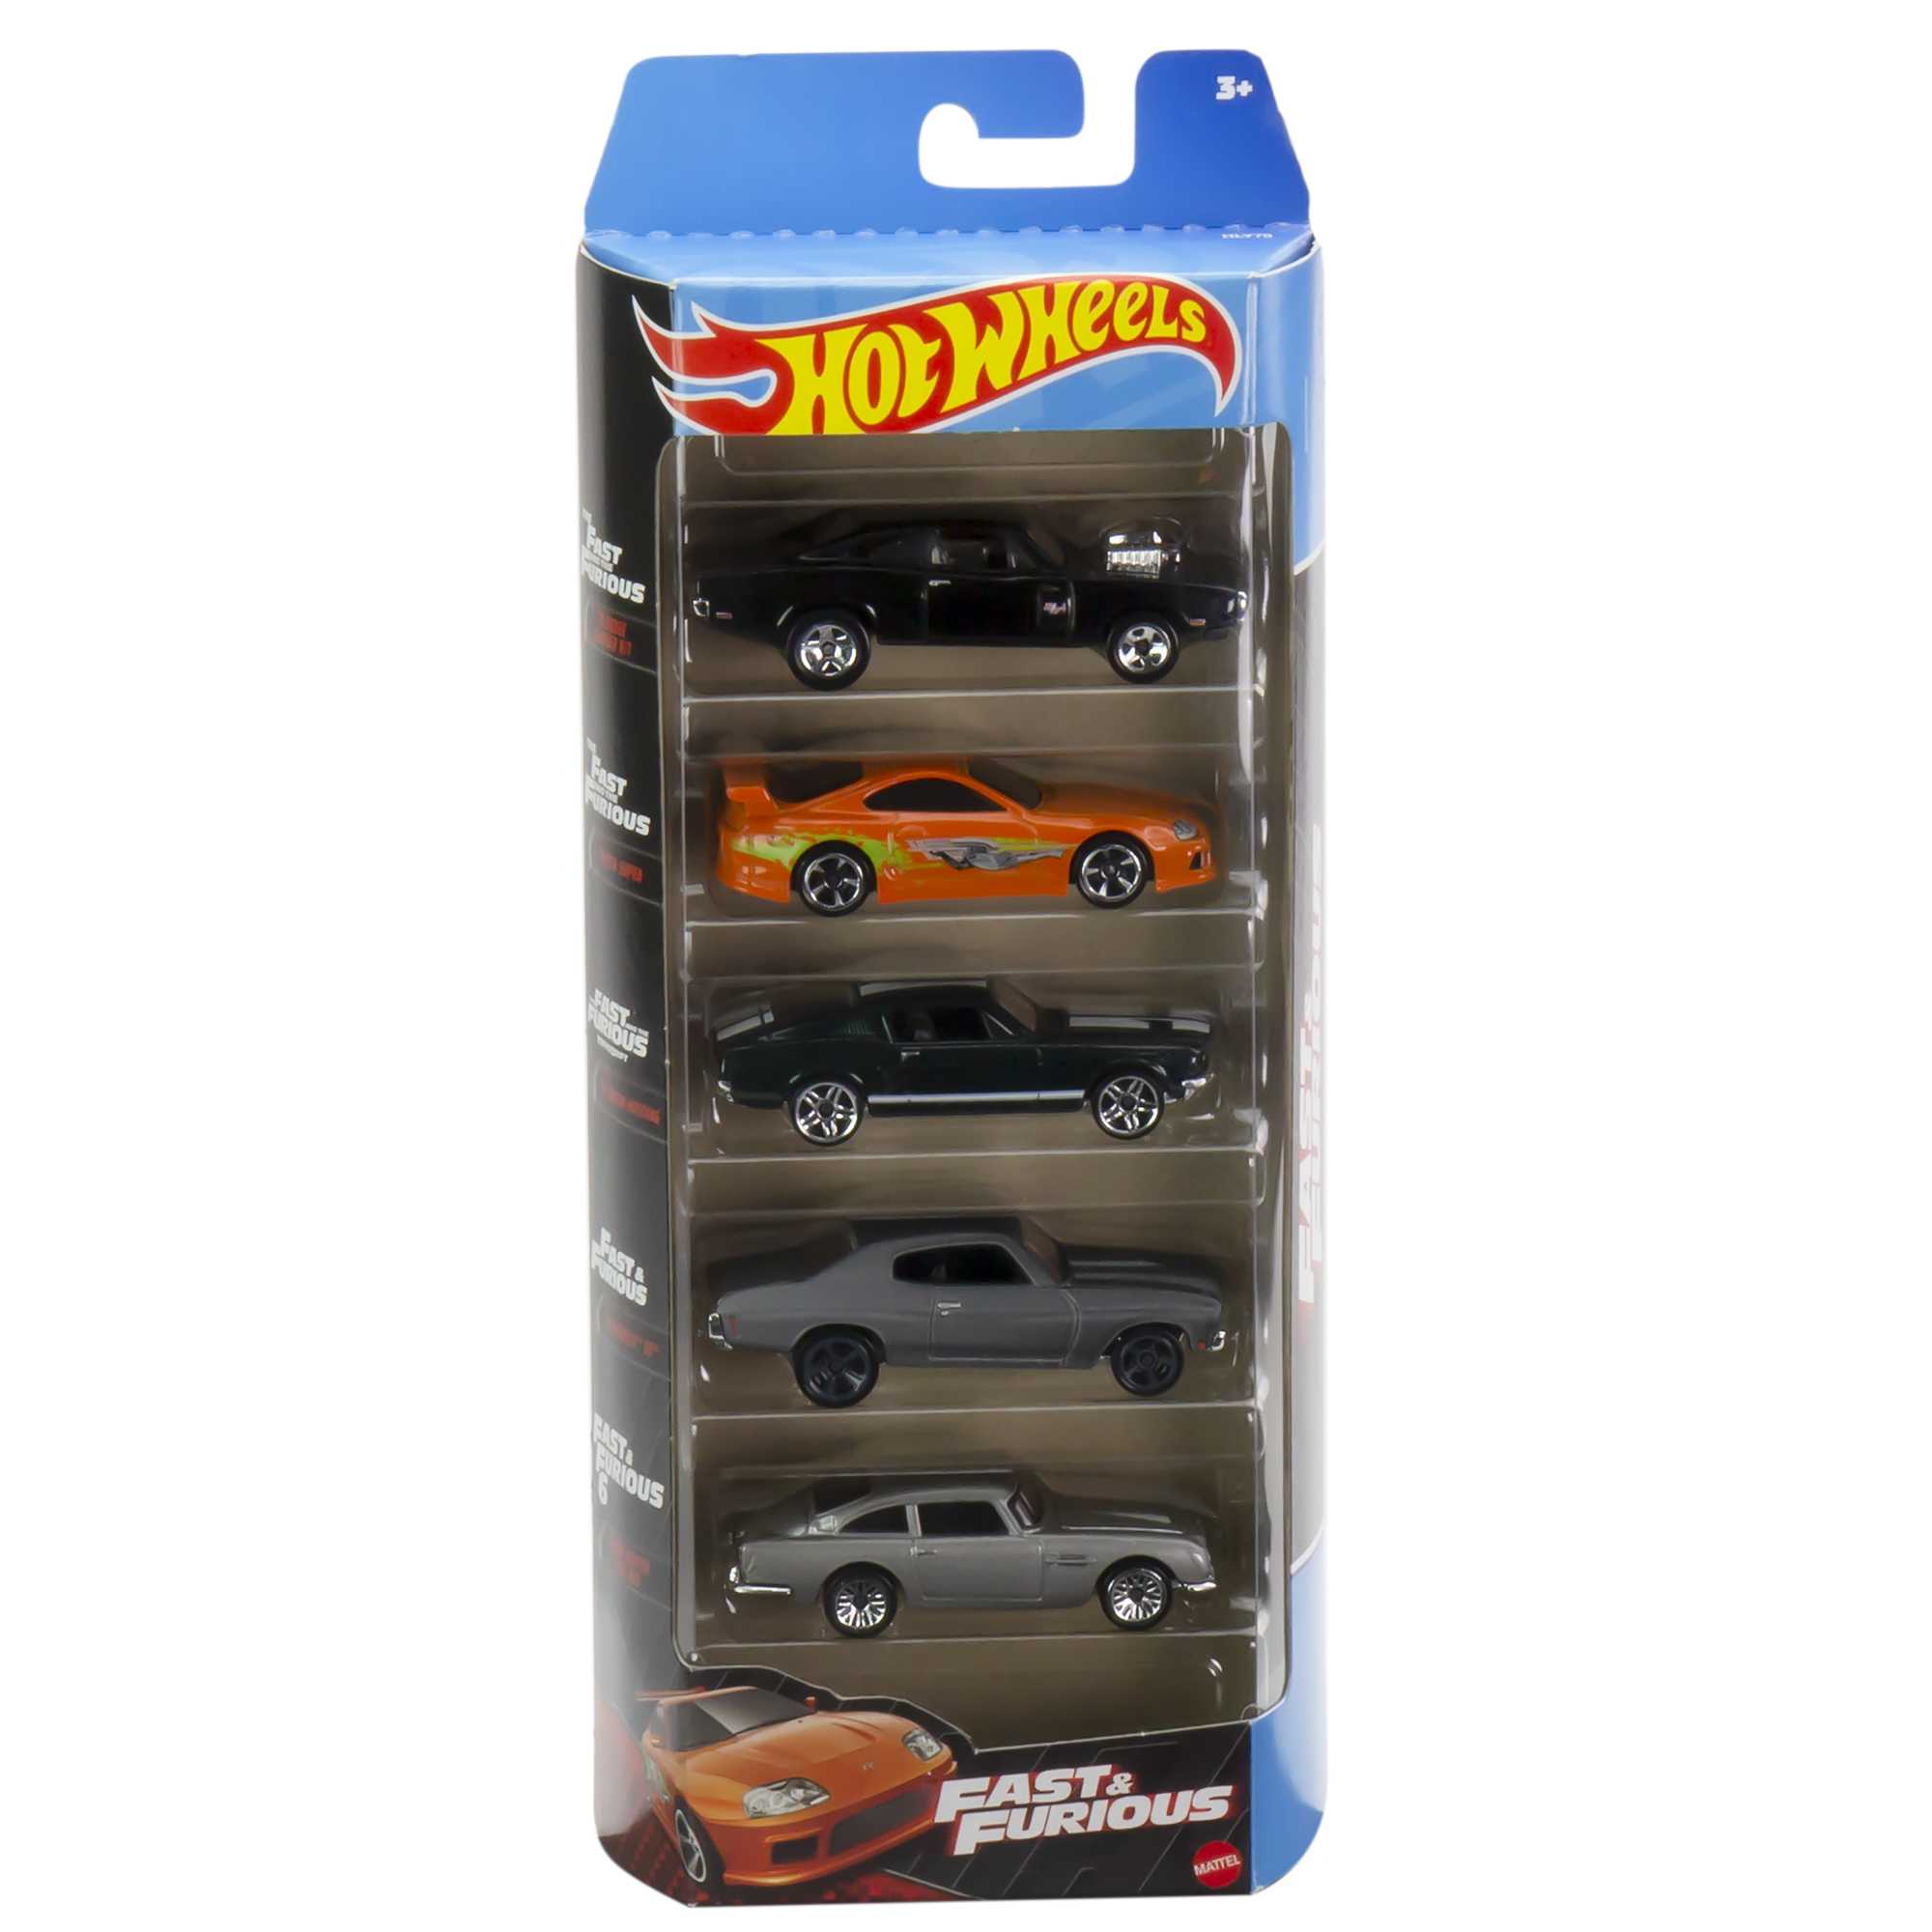 Hot Wheels Fast and Furious Cars, 5-Pack Toy Cars